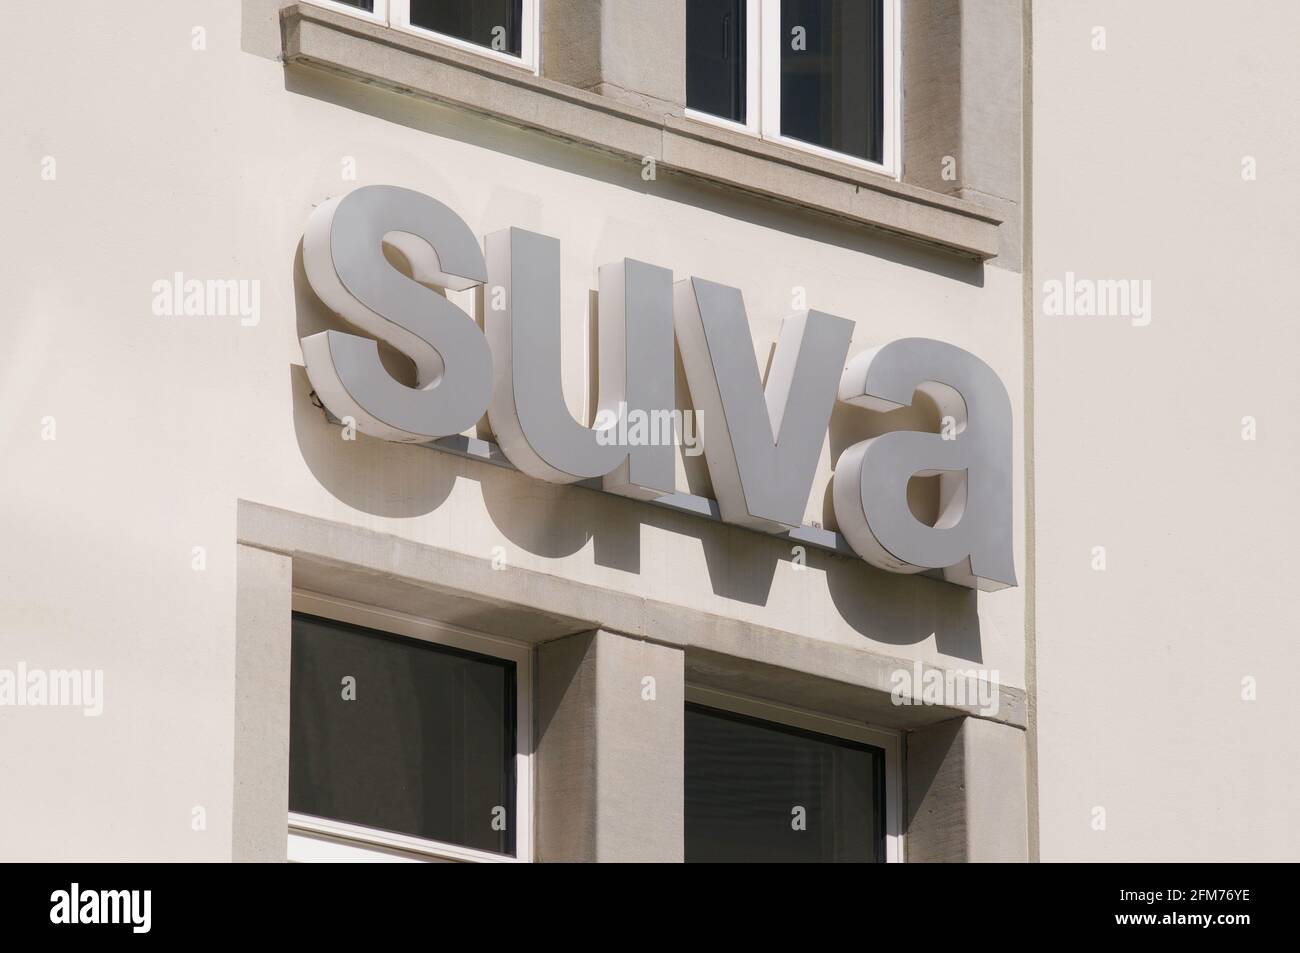 St. Gallen, Switzerland - 14th April 2021 : SUVA insurance sign hanging on a building in St. Gallen. Suva is the Swiss National Accident Insurance pro Stock Photo